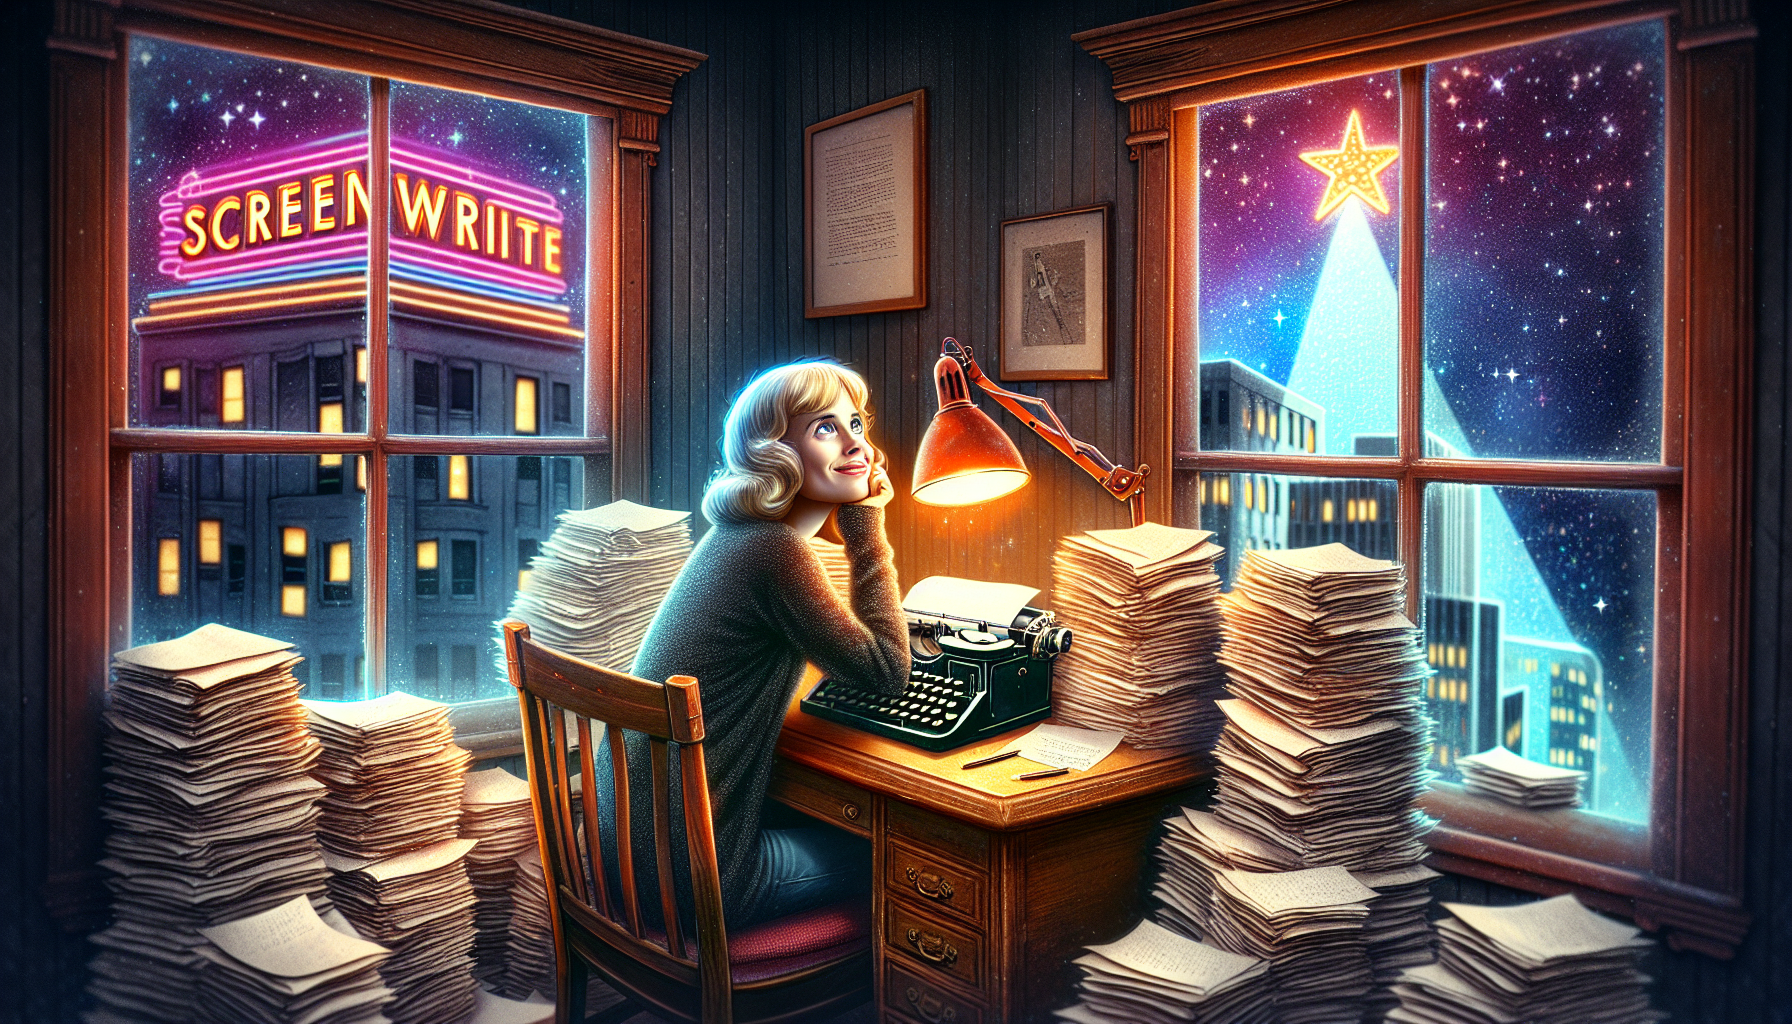 An artistically designed image of a hopeful screenwriter sitting at a vintage wooden desk, surrounded by stacks of screenplay manuscripts, in a cozy, dimly lit room with a typewriter and a shining lam